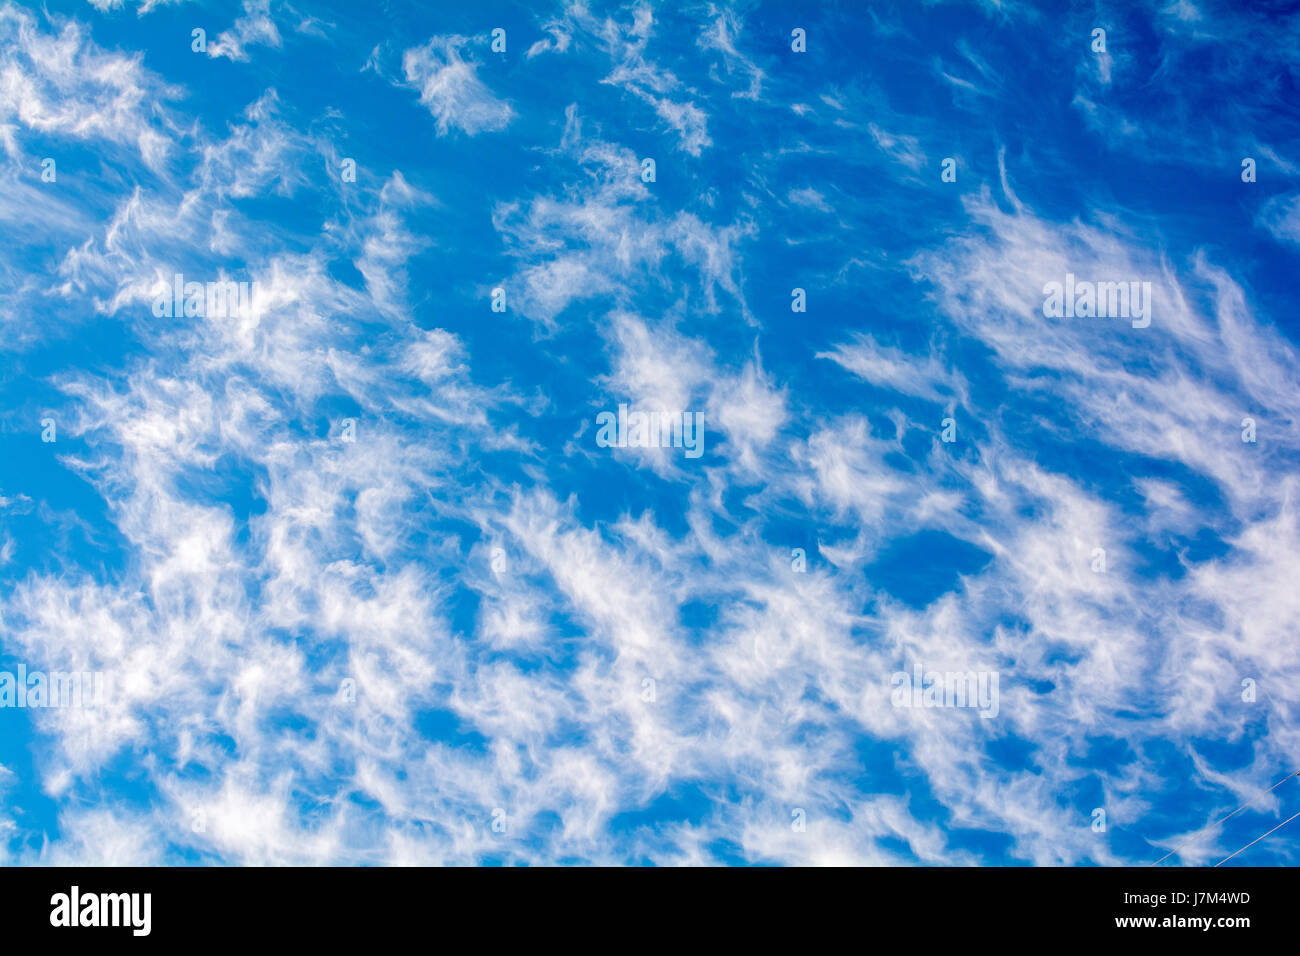 Cute Cirrus clouds in the blue sky picture perfect Stock Photo